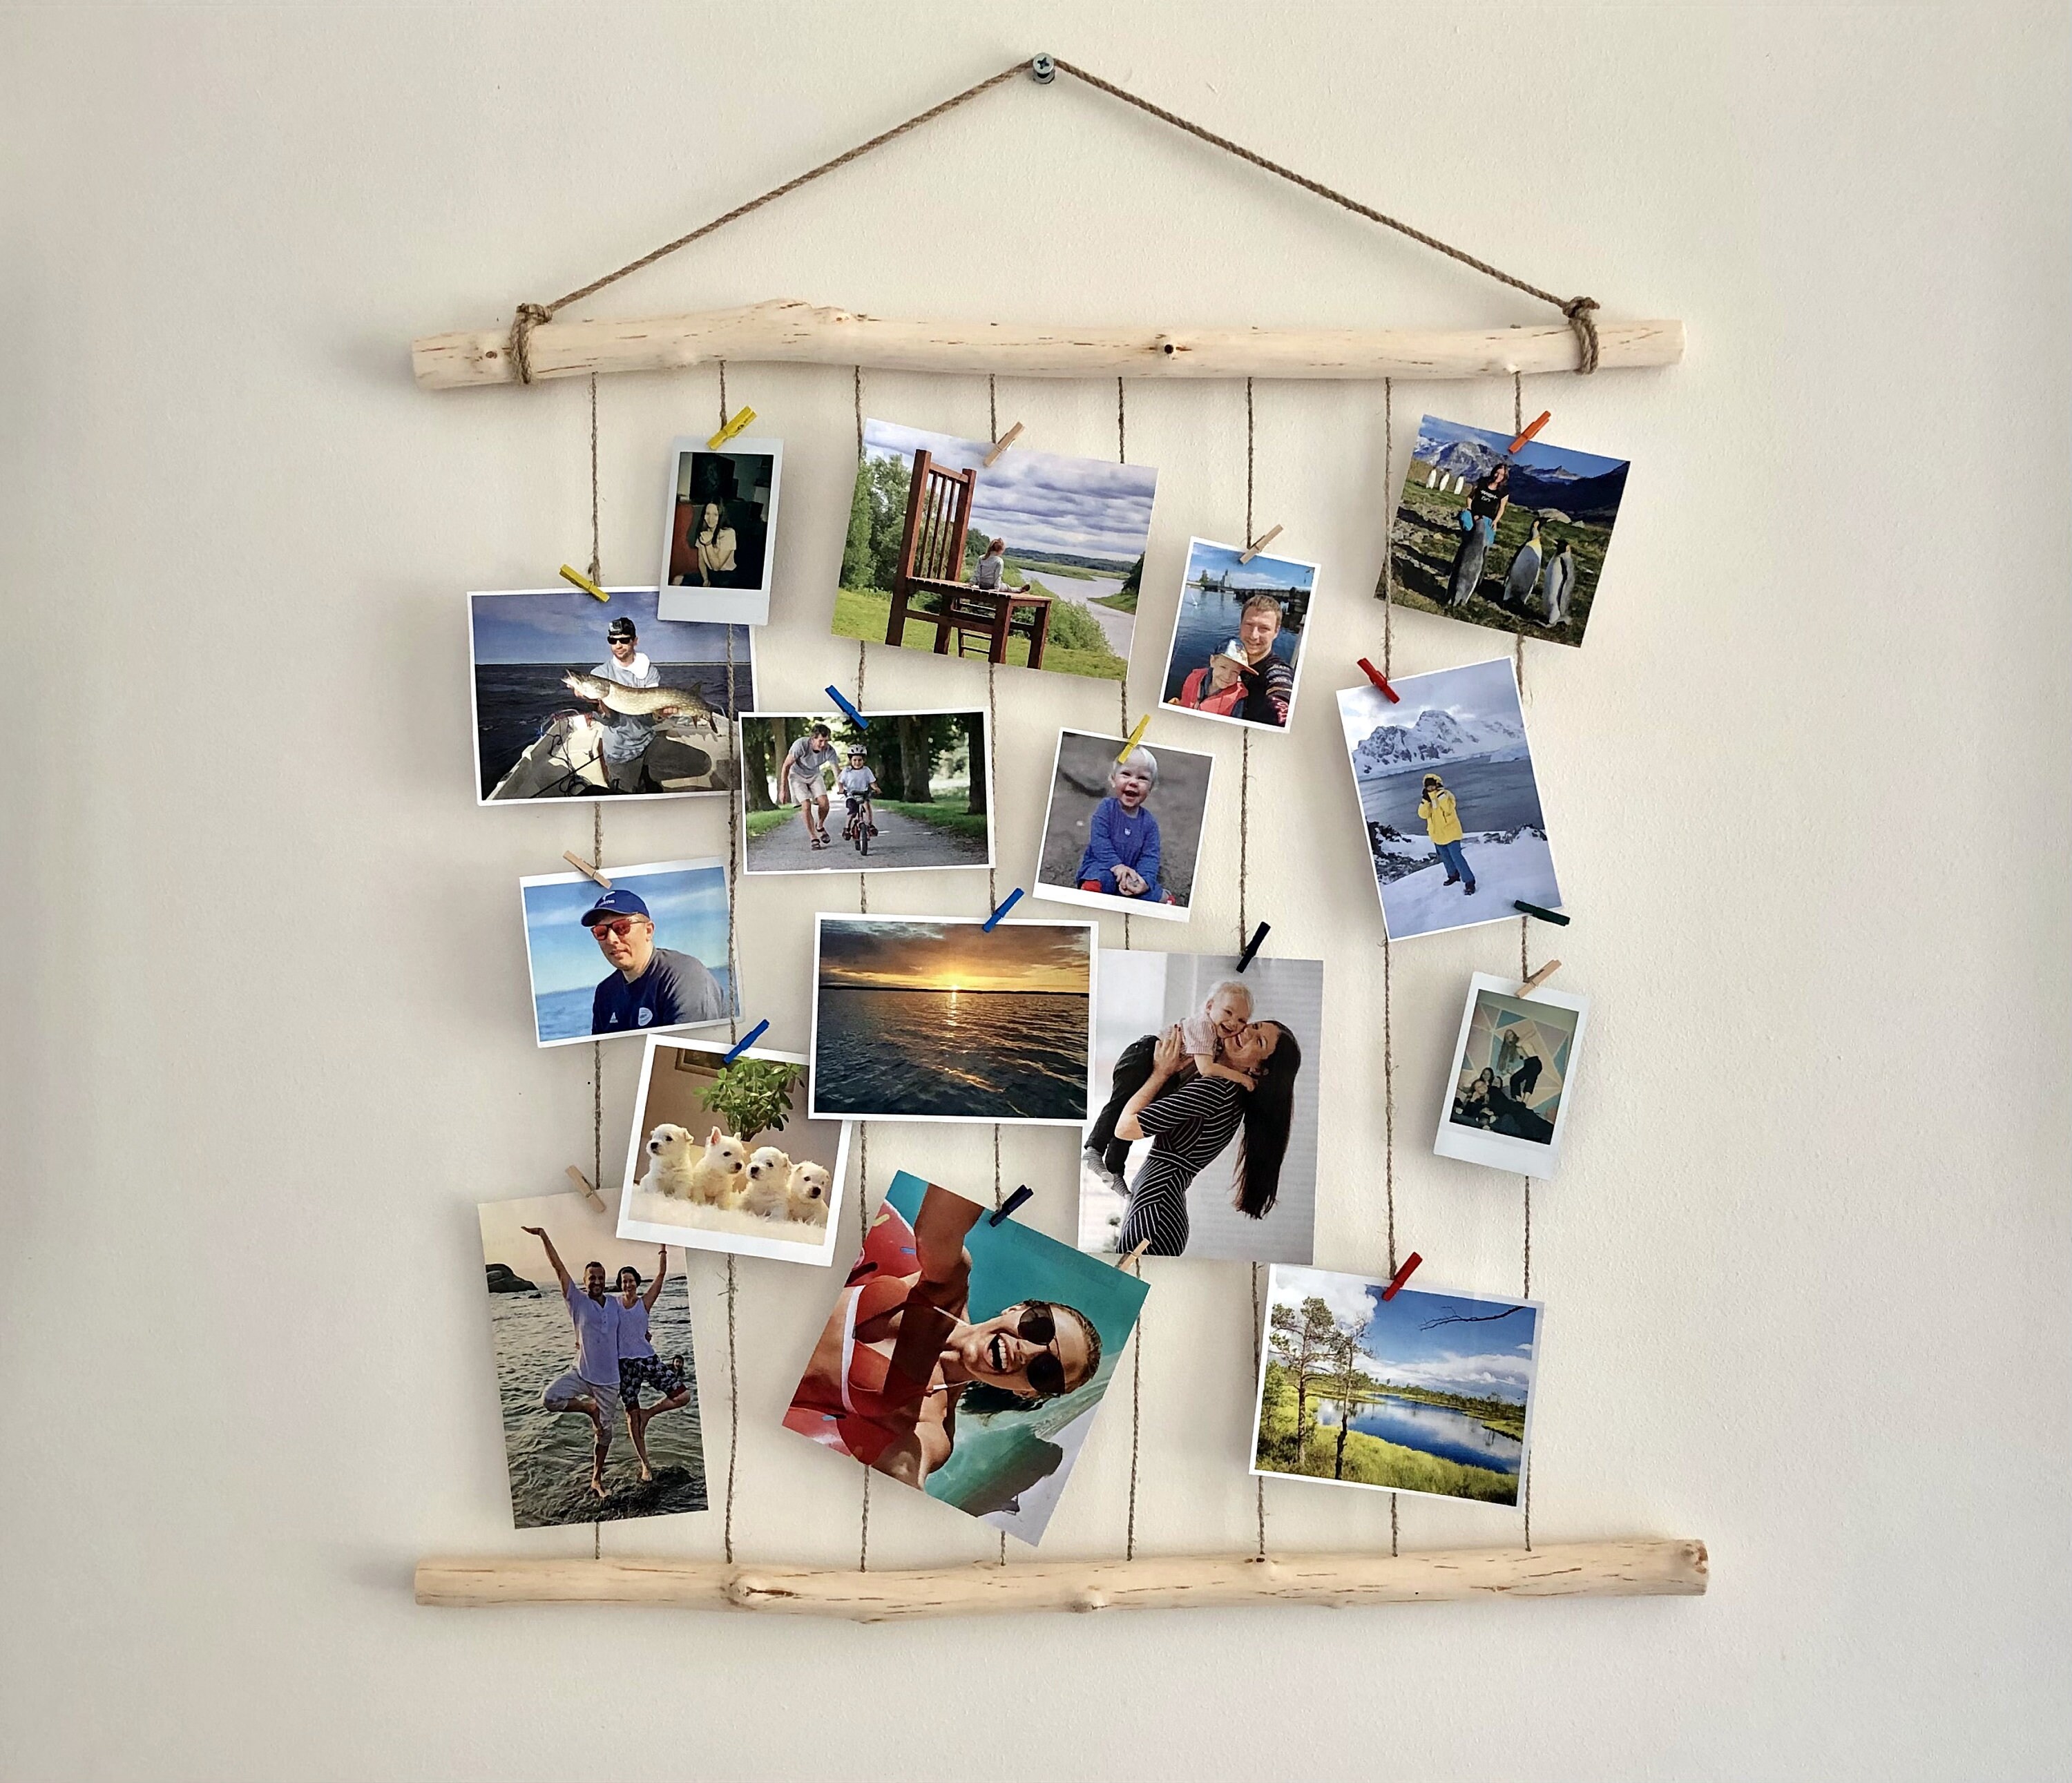 Hang pictures with fishing line and clothes pins!